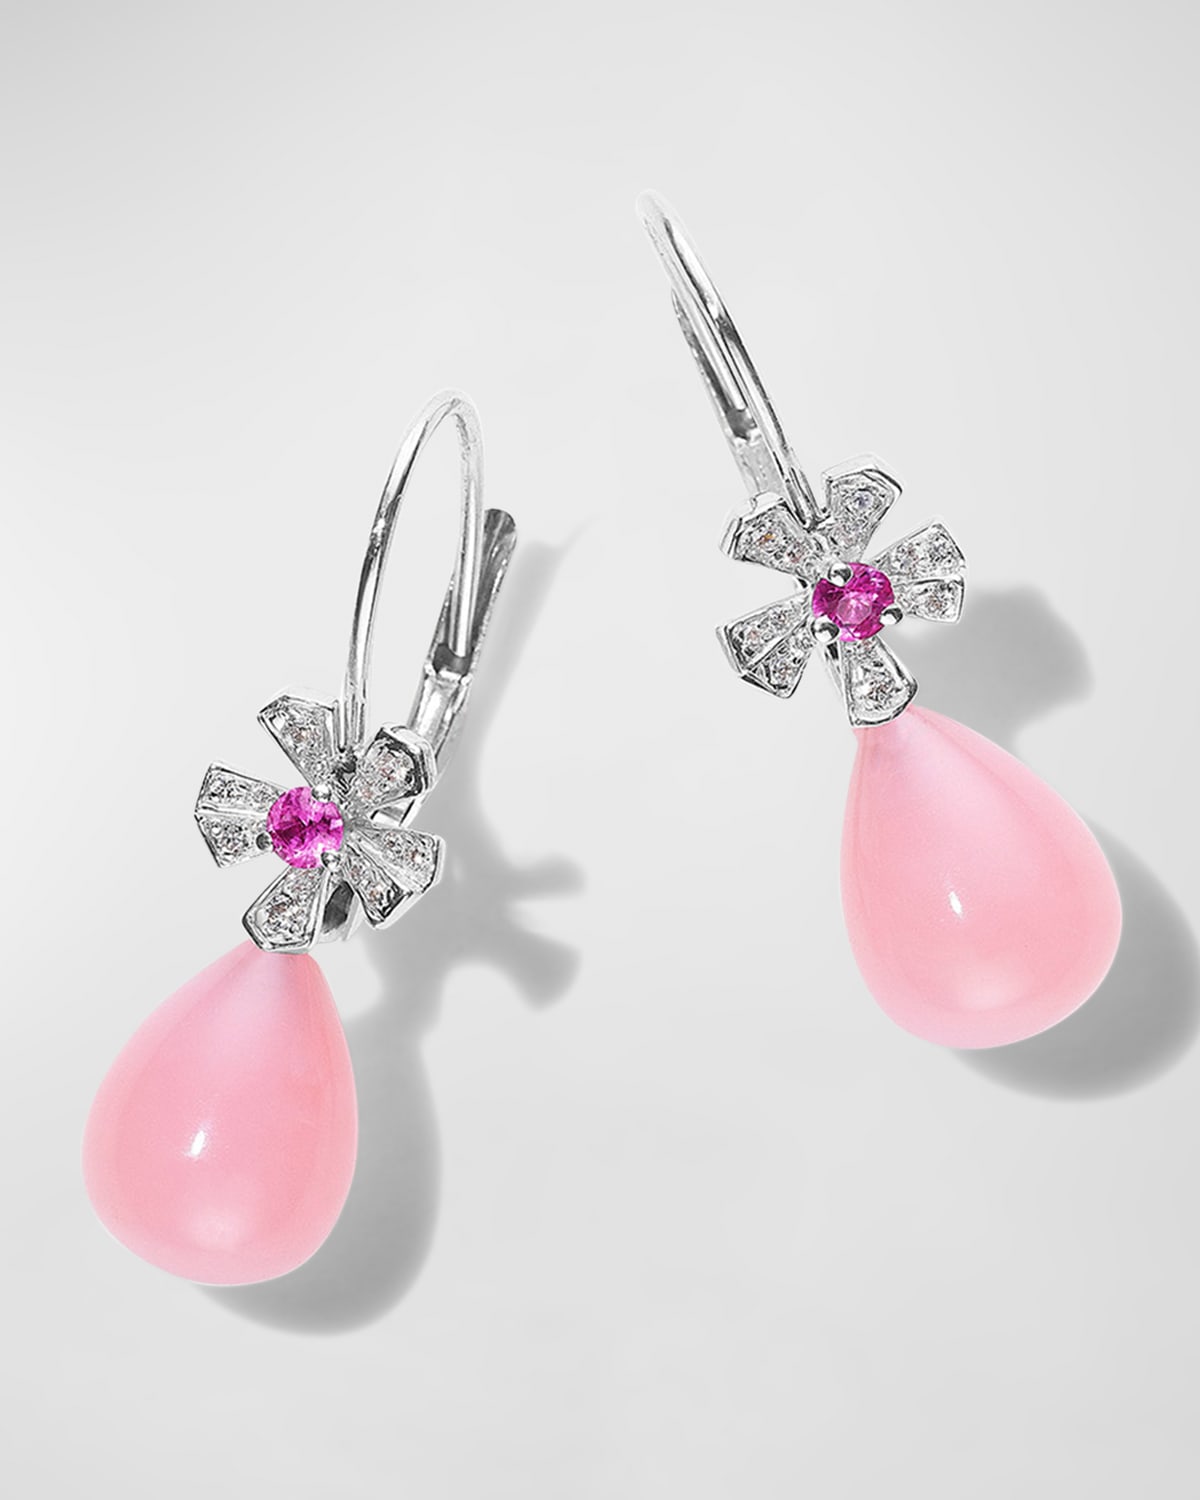 18K White Gold Diamond and Sapphire Flower Earrings with Pink Opal Drops